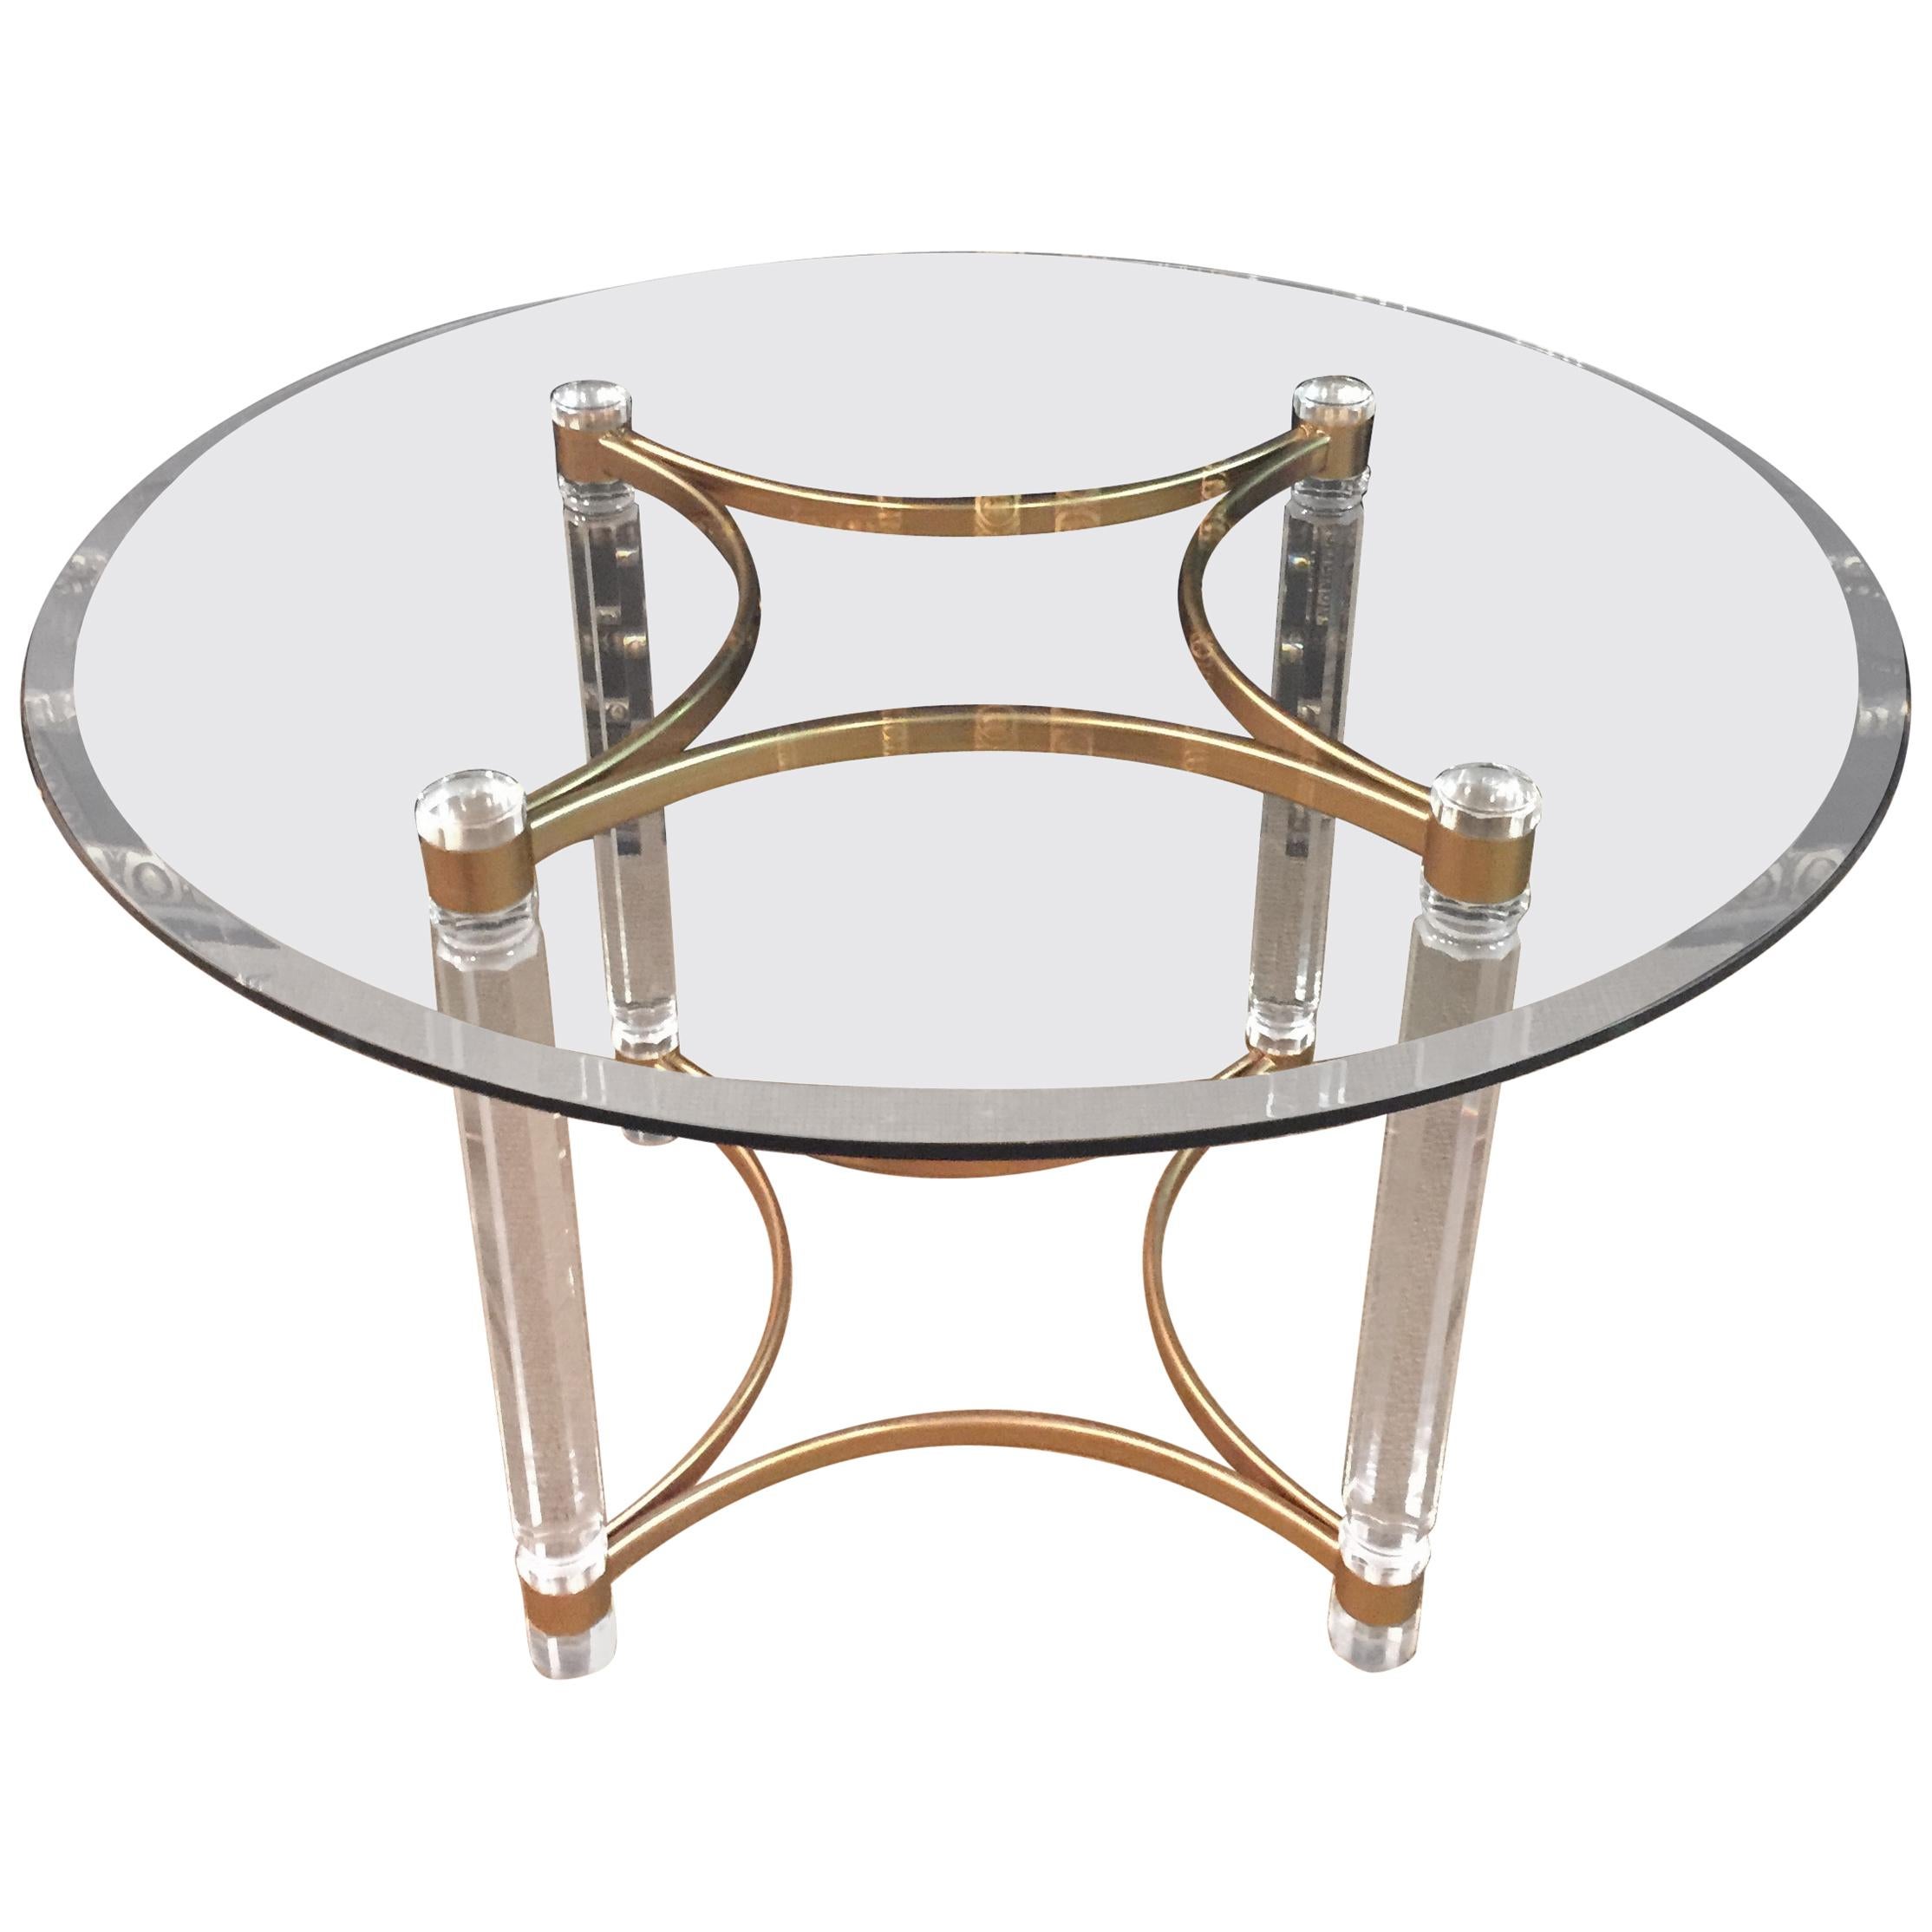 Acrylic Dining Table with Four Collumns Legs and Round Glass Plate